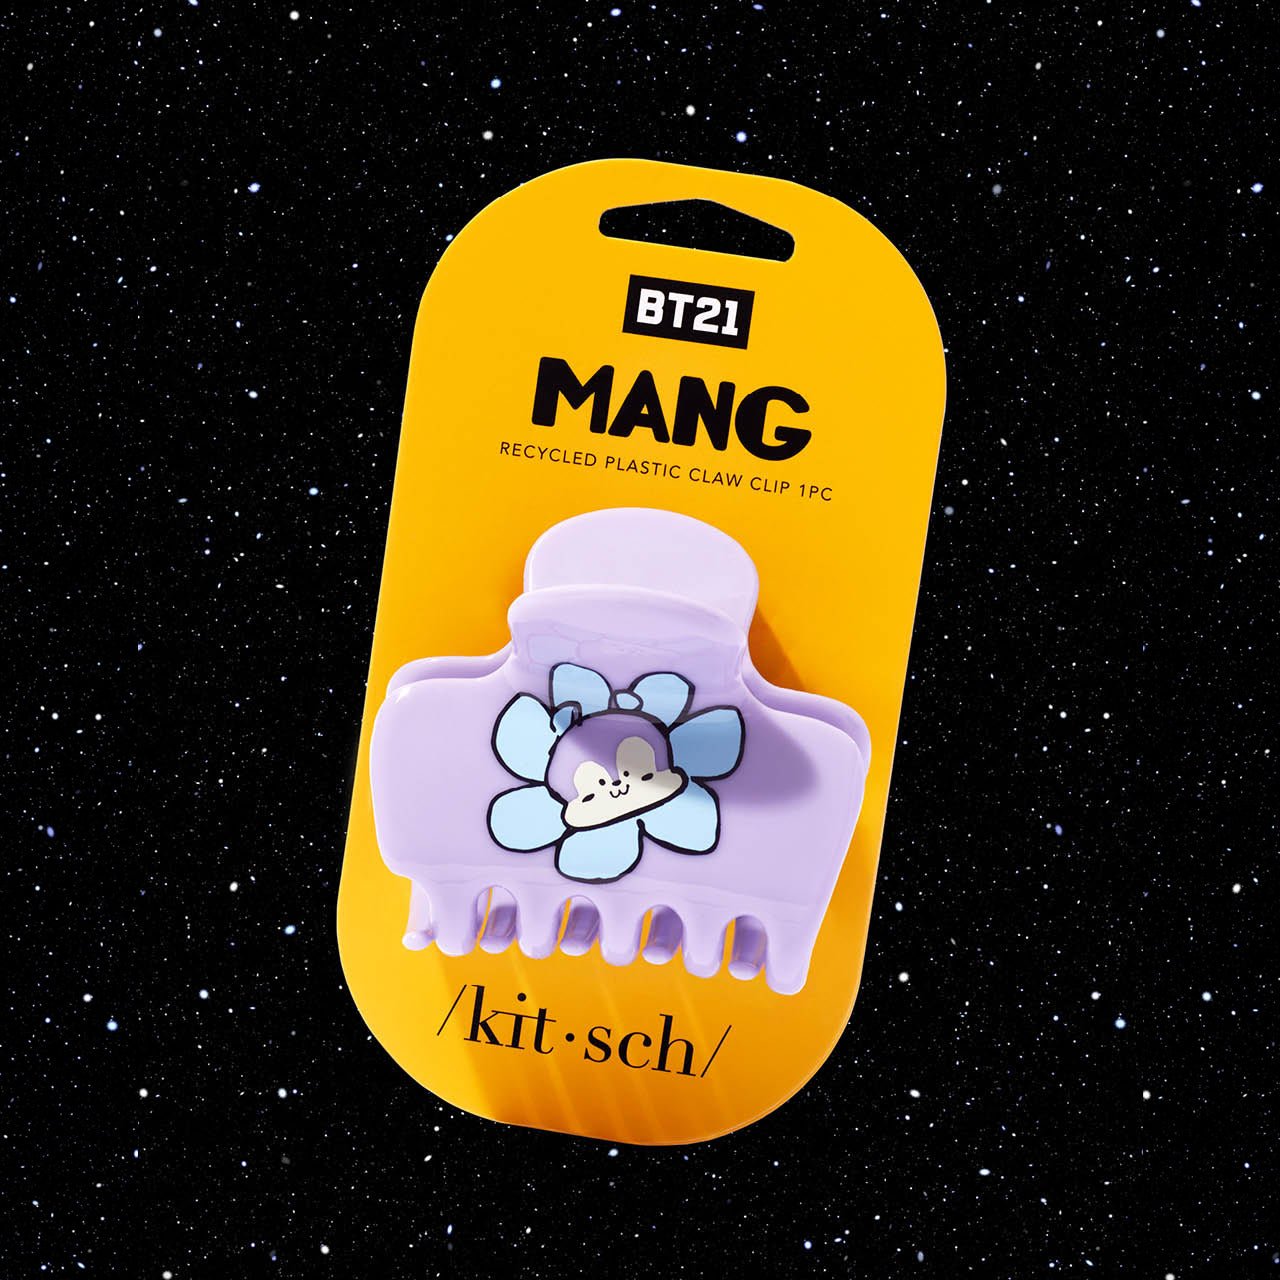 BT21 meets Kitsch Recycled Plastic Puffy Claw Clip 1pc - MANG